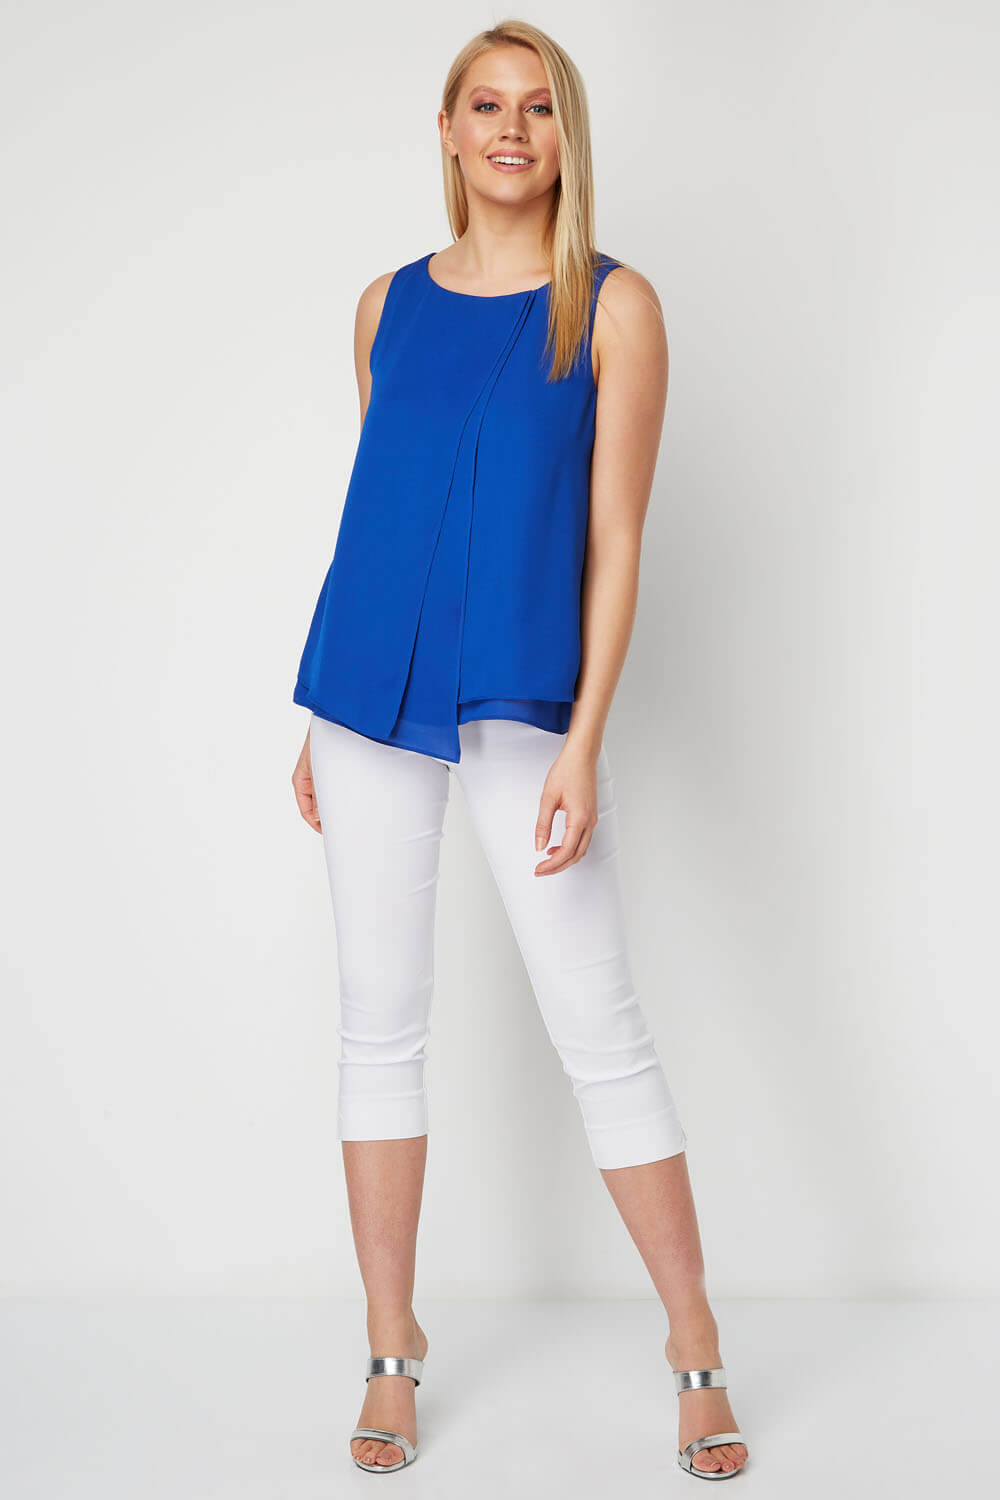 Royal Blue Double Layer Chiffon Top, Image 2 of 8